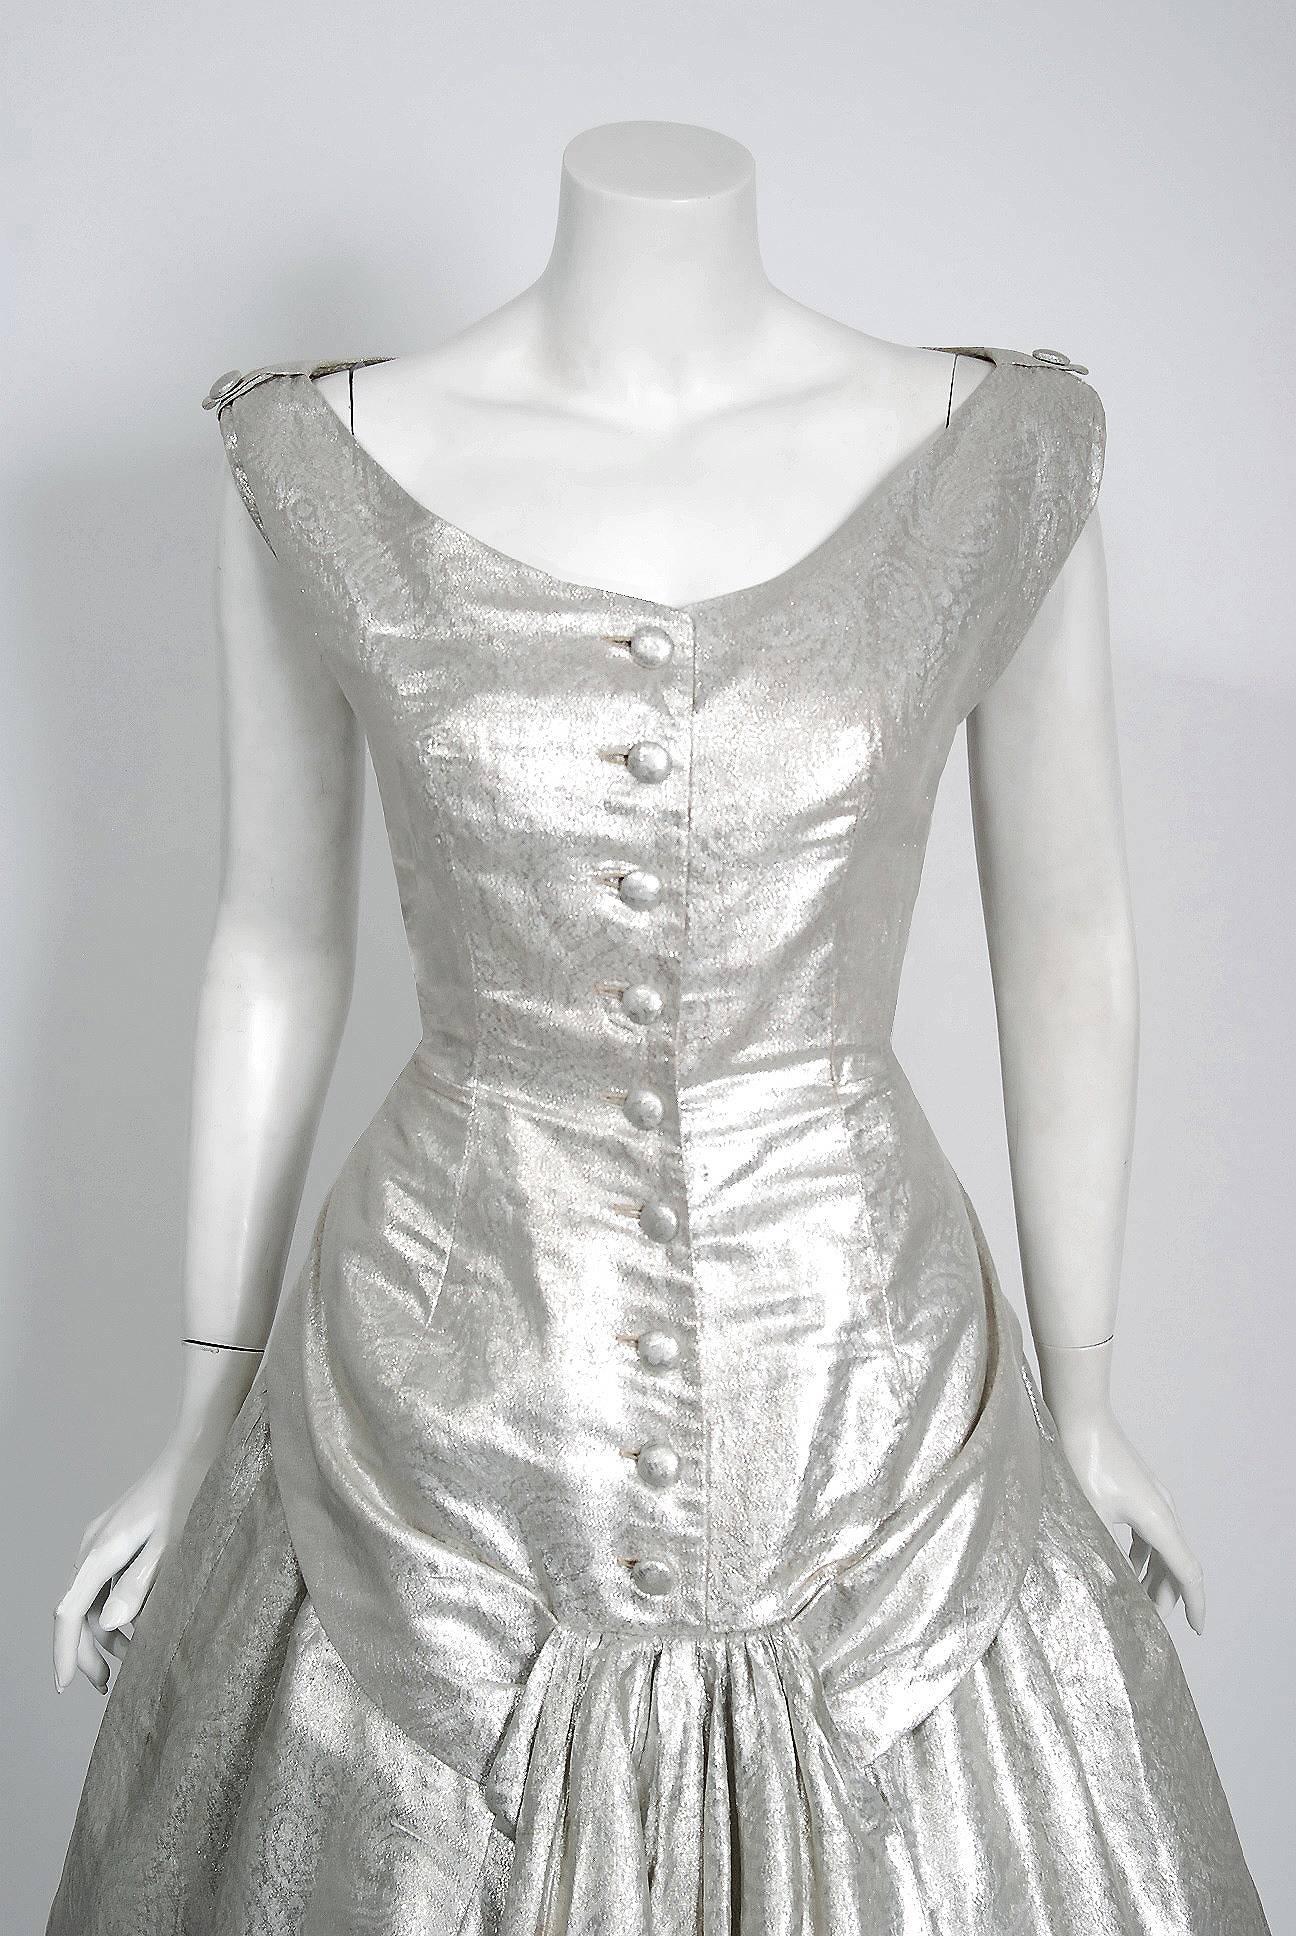 Sparkling Suzy Perette designer metallic silver lamé cocktail party dress dating back to the mid 1950's. Suzy Perette was not an actual person, but the name of a dress manufacturing company that made affordable versions of haute-couture Parisian